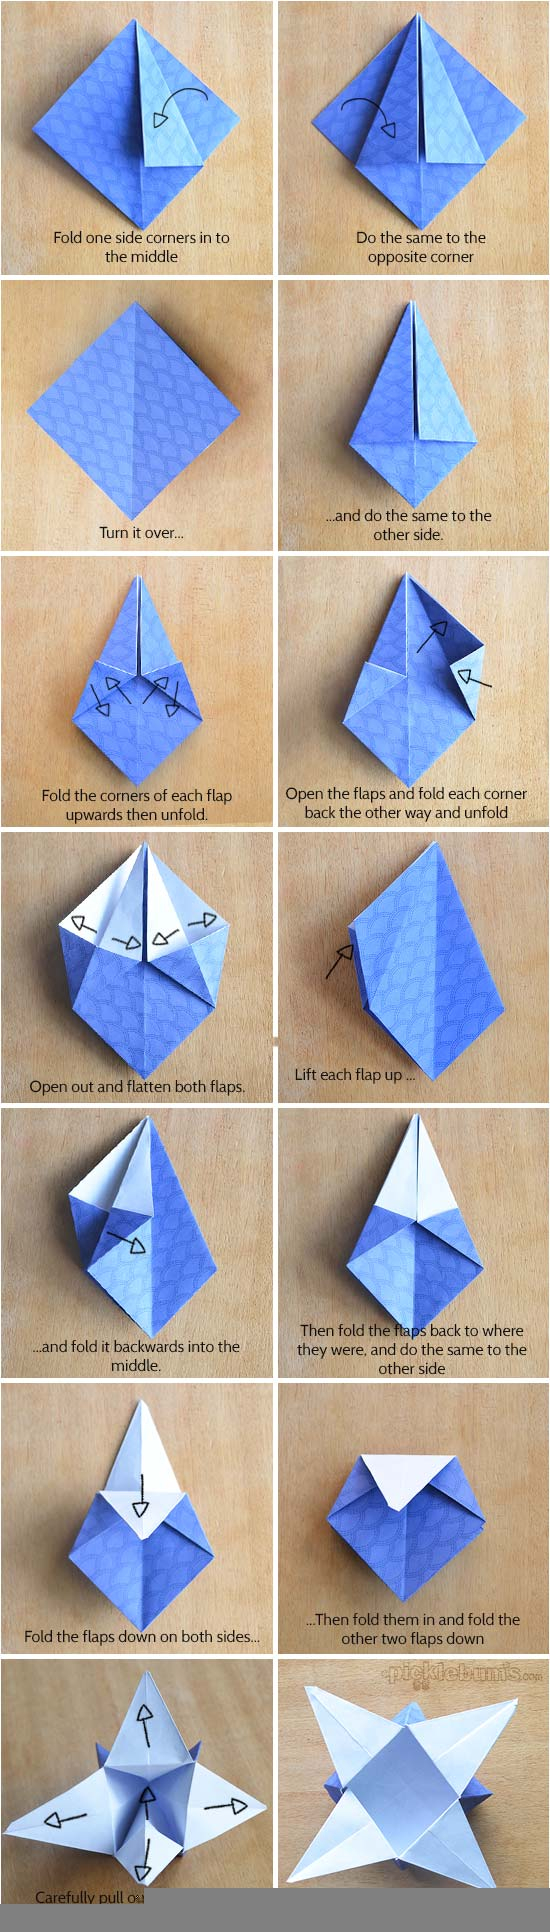 How To Make An Origami Star Origami Star Boxes With Printable Origami Paper Picklebums